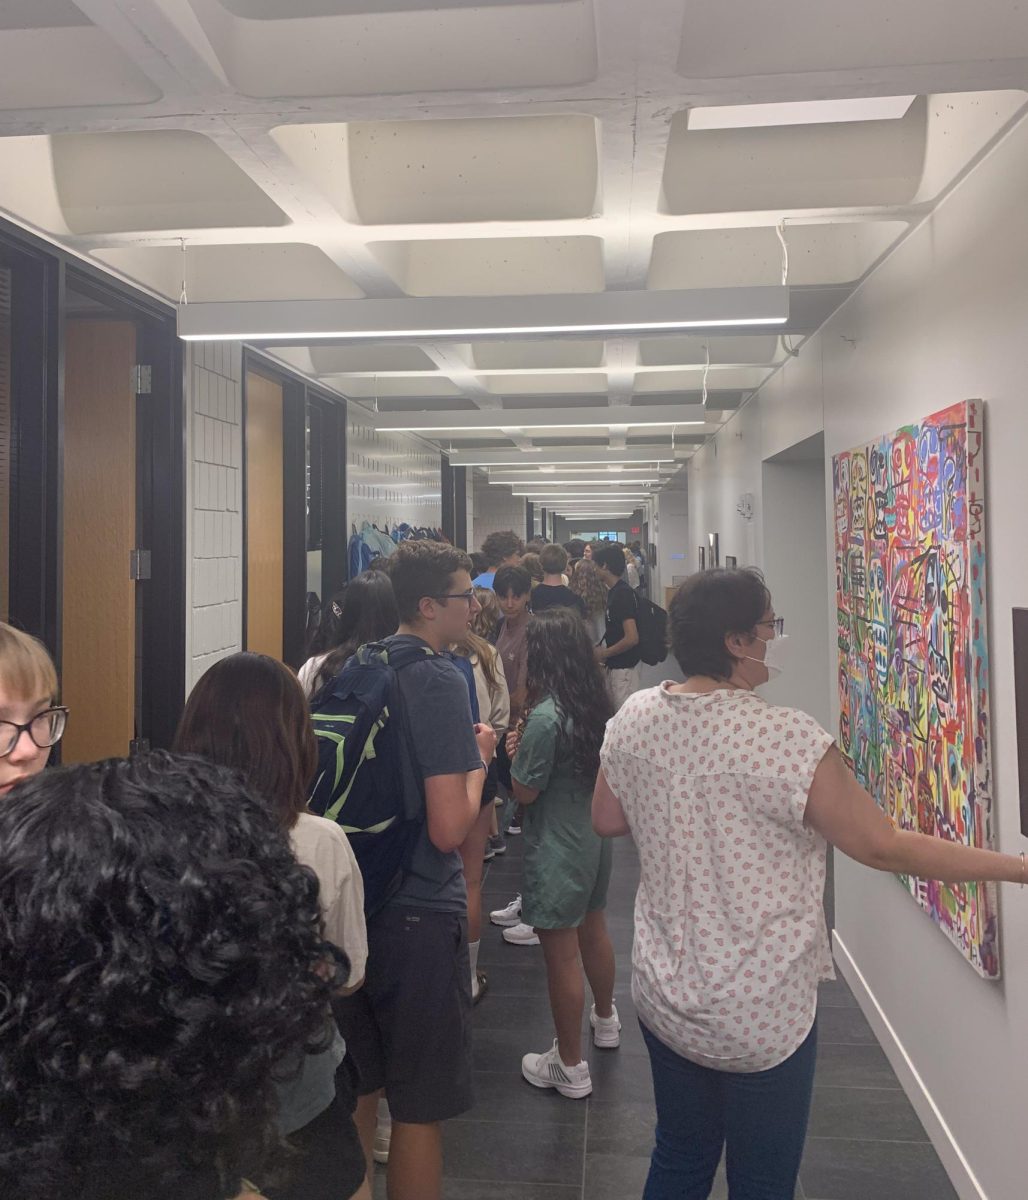 LUNCH RUSH. Students fill up the entire lunch hallway waiting to be let in for early lunch. This year, a 10 minute break period was implemented between period 2 and early lunch causing this line.